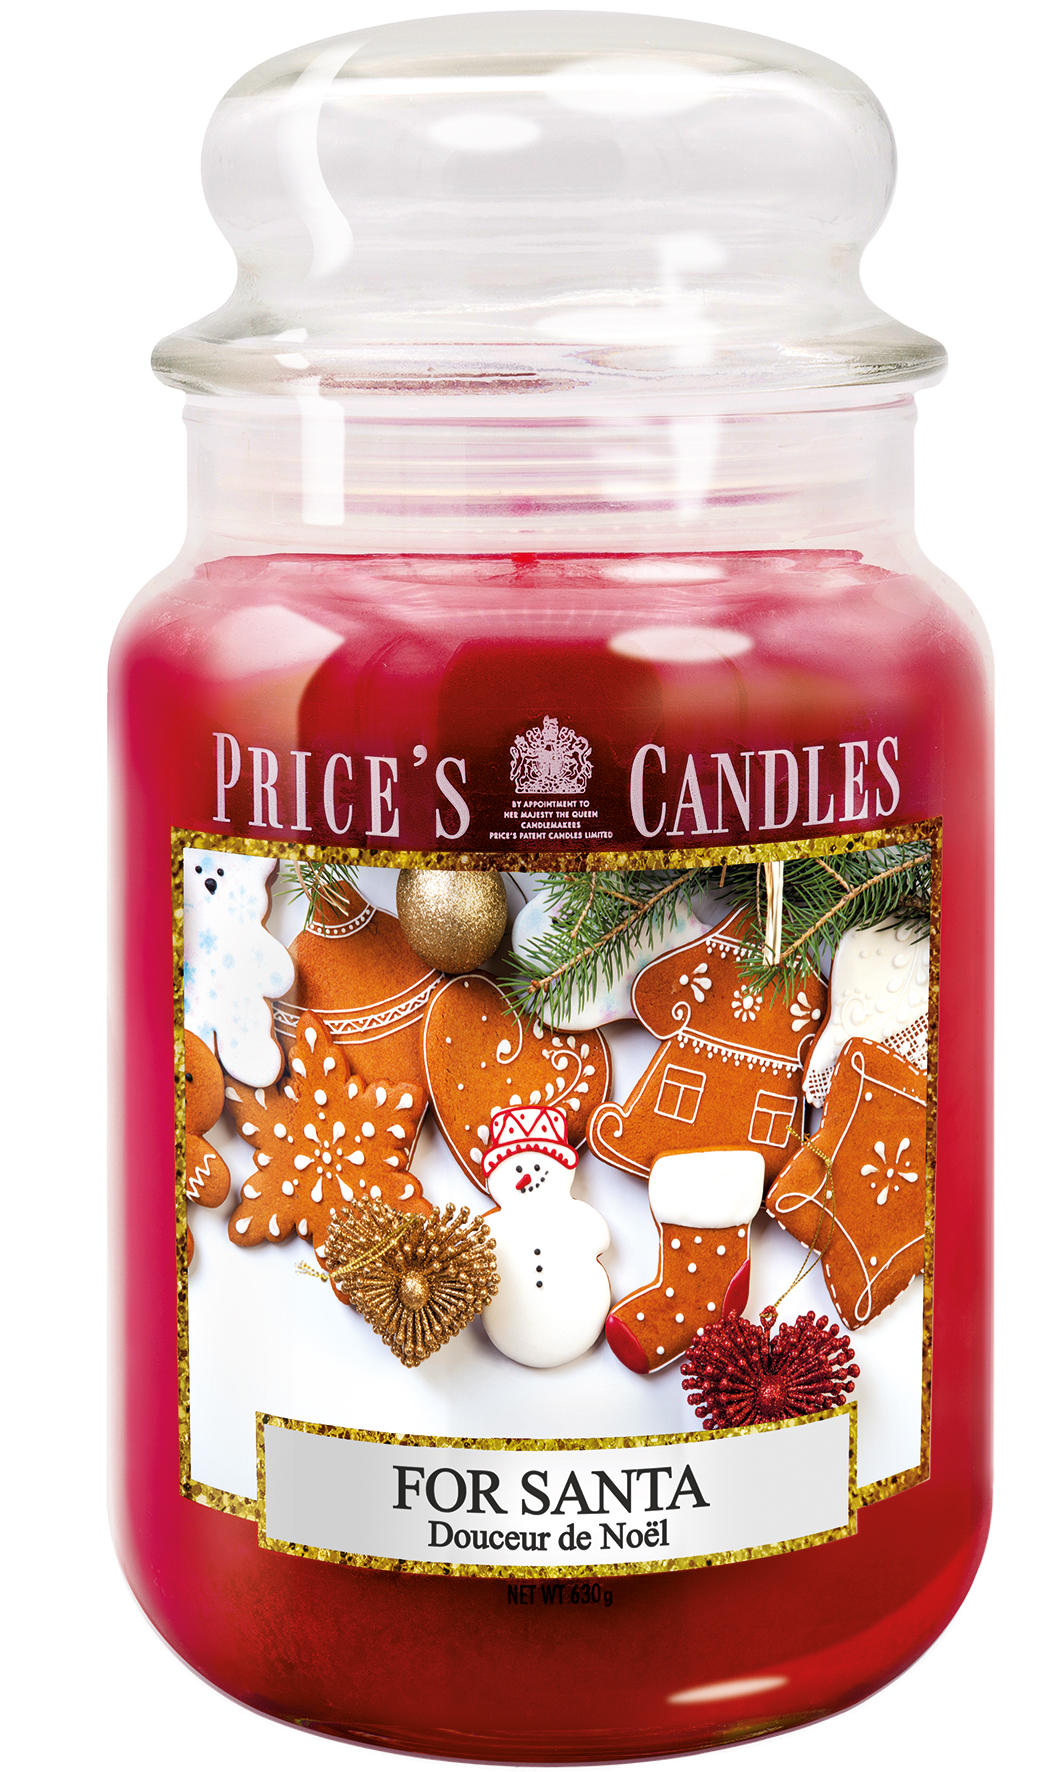 Prices Candle "For Santa" 630g 